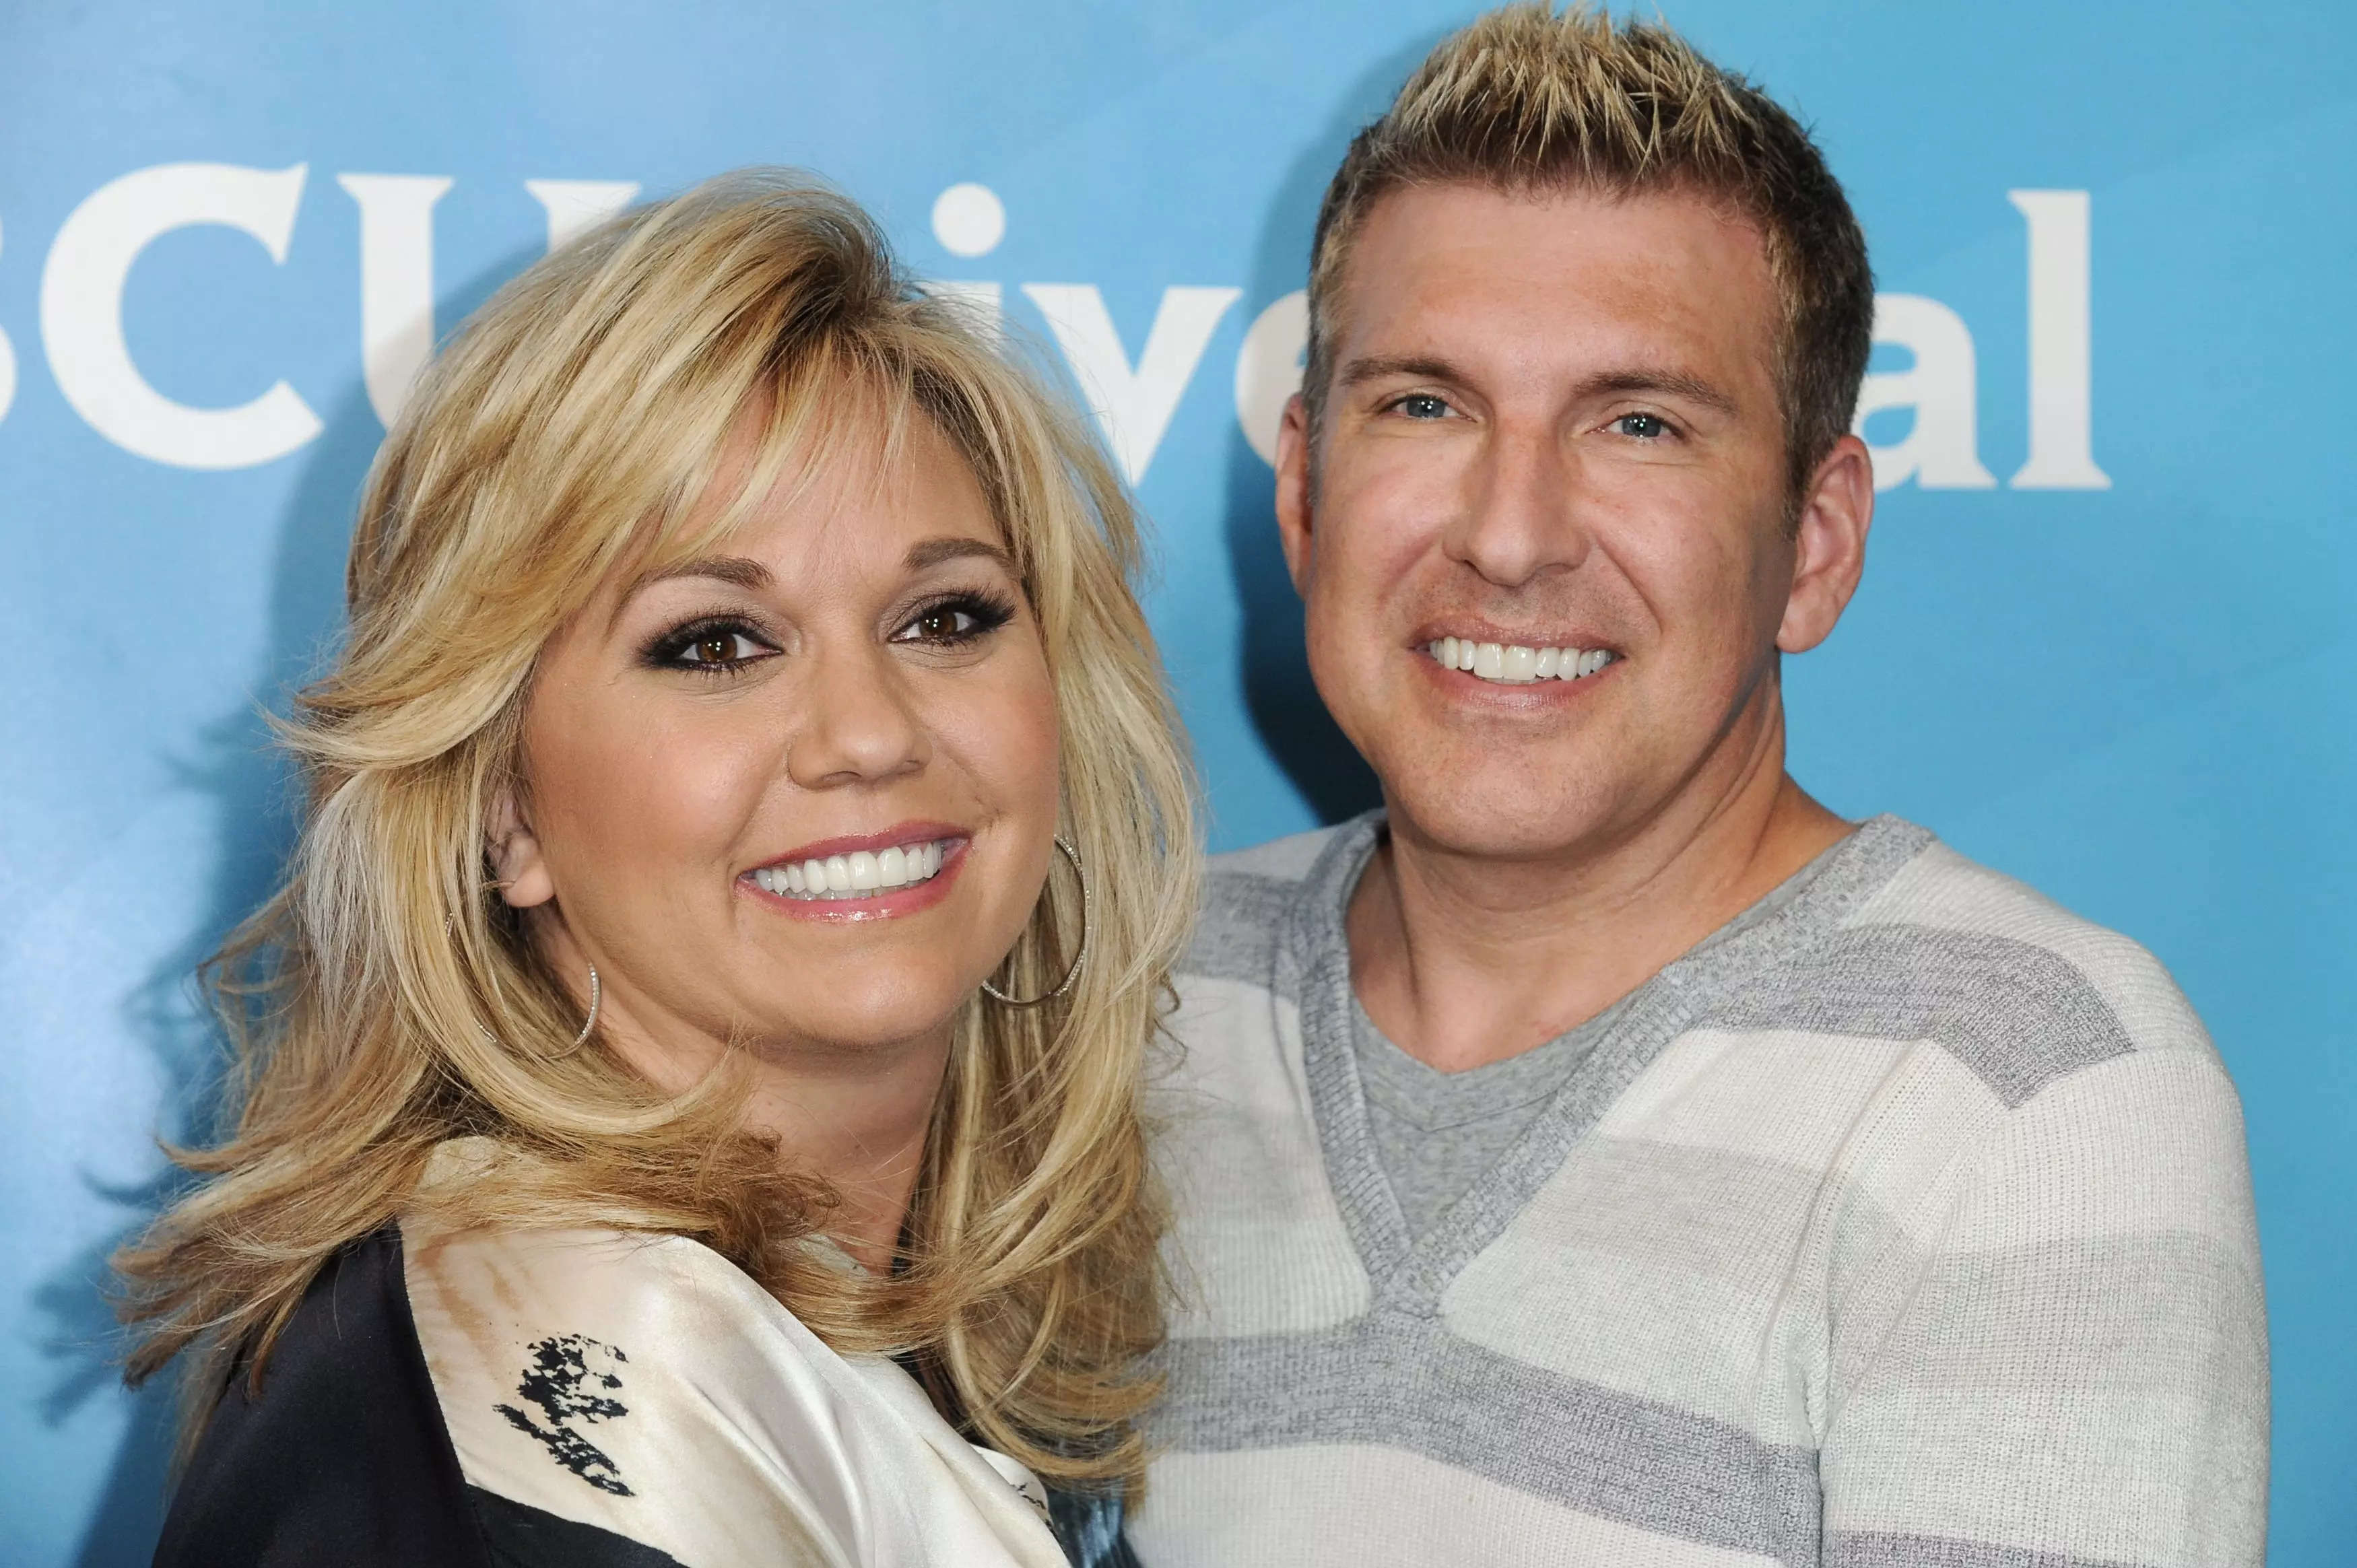 Todd Chrisley's lawyer calls ex-business partner's affair claims pure 'fantasy' in closing arguments